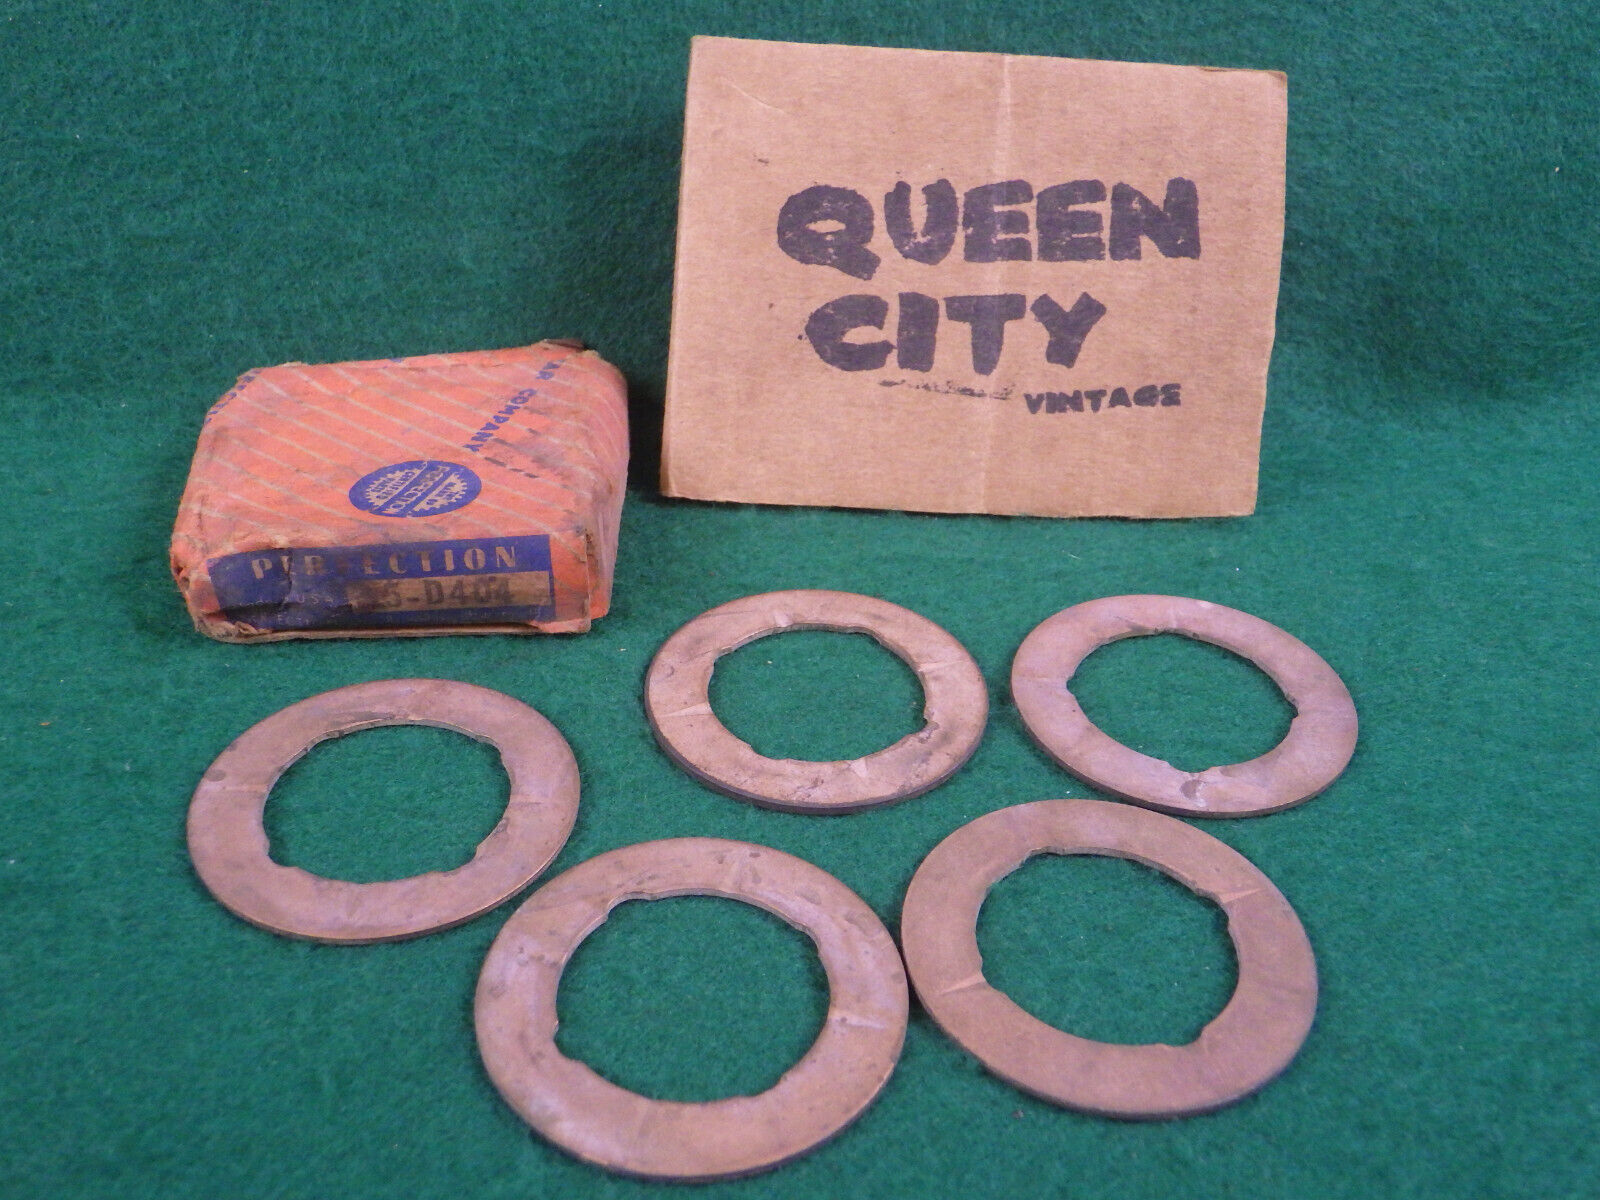 NOS perfecetion gear transmission thrust washers 1930-1940s Ford-GM-Chevy Dodge?